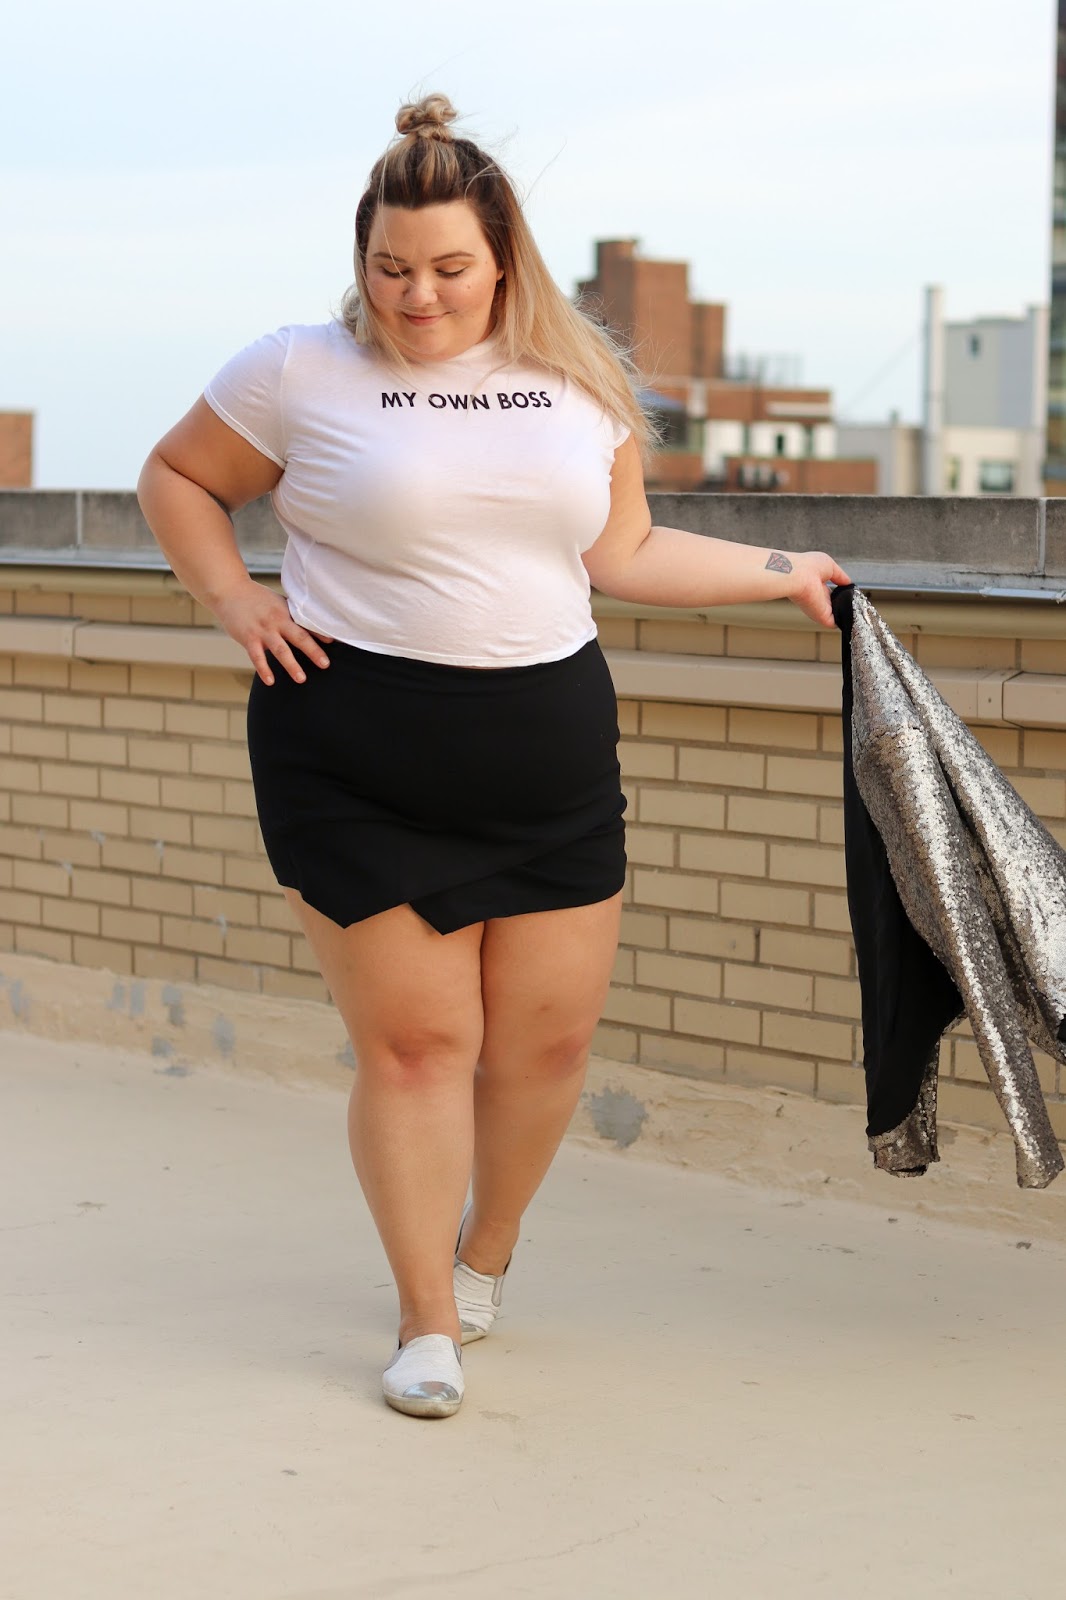 gaining confidence, natalie in the city, chicago fashion blogger, plus size fashion blogger, affordable plus size clothing, plus size fashion, chicago blogger, curves and confidence, fashion nova curve, fashion nova, fatshion, plus size crop tops